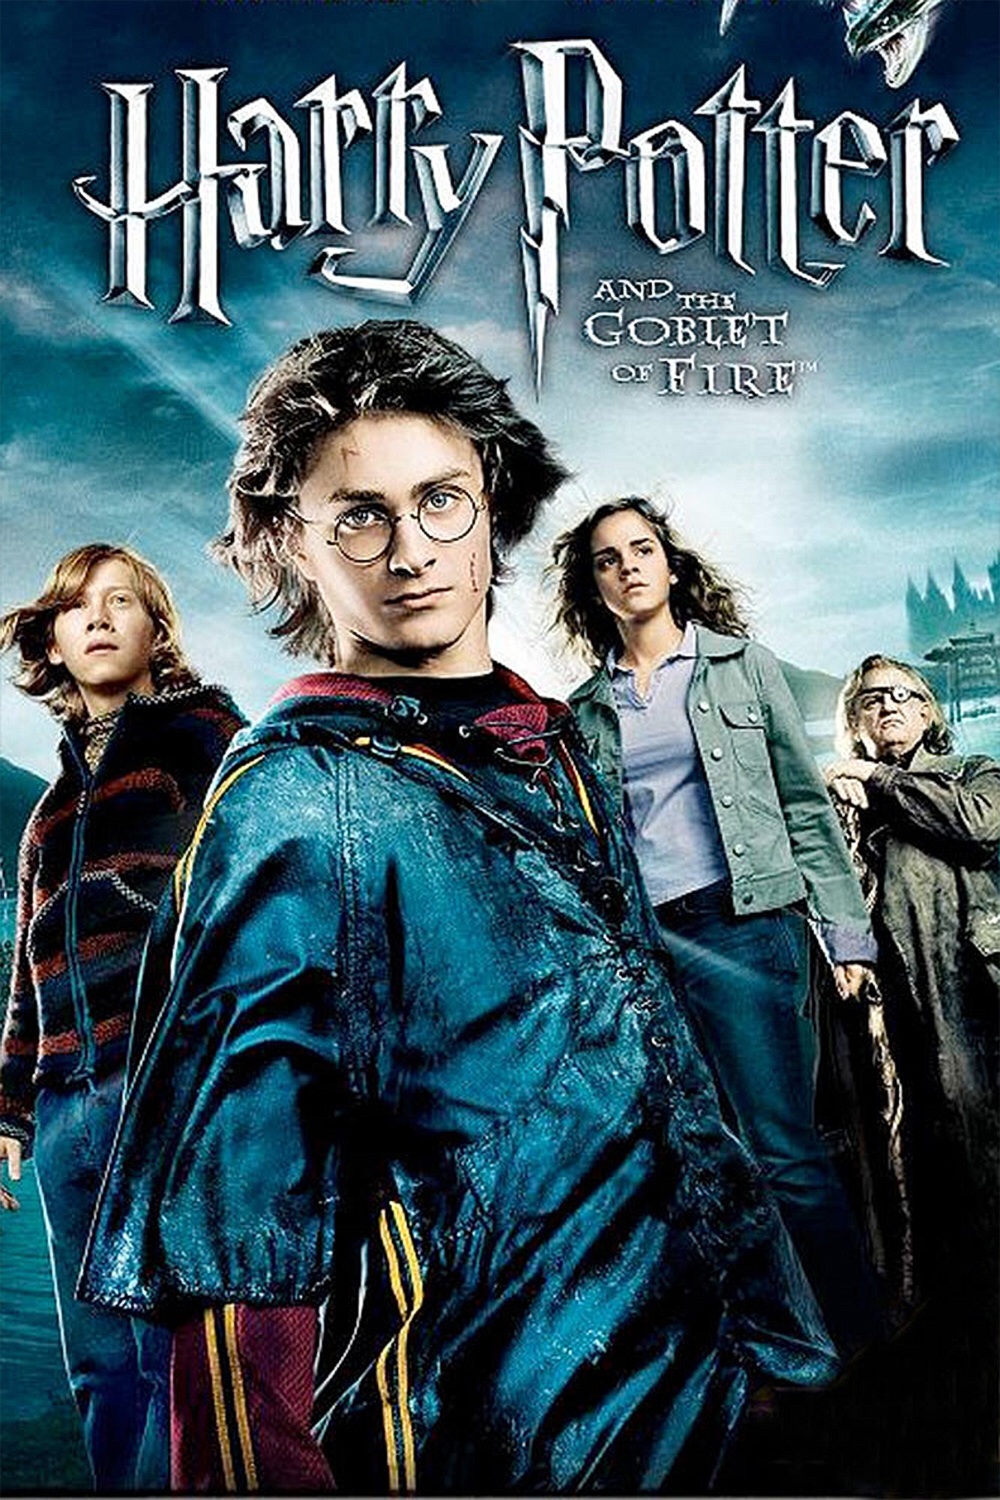 goblet of fire release date